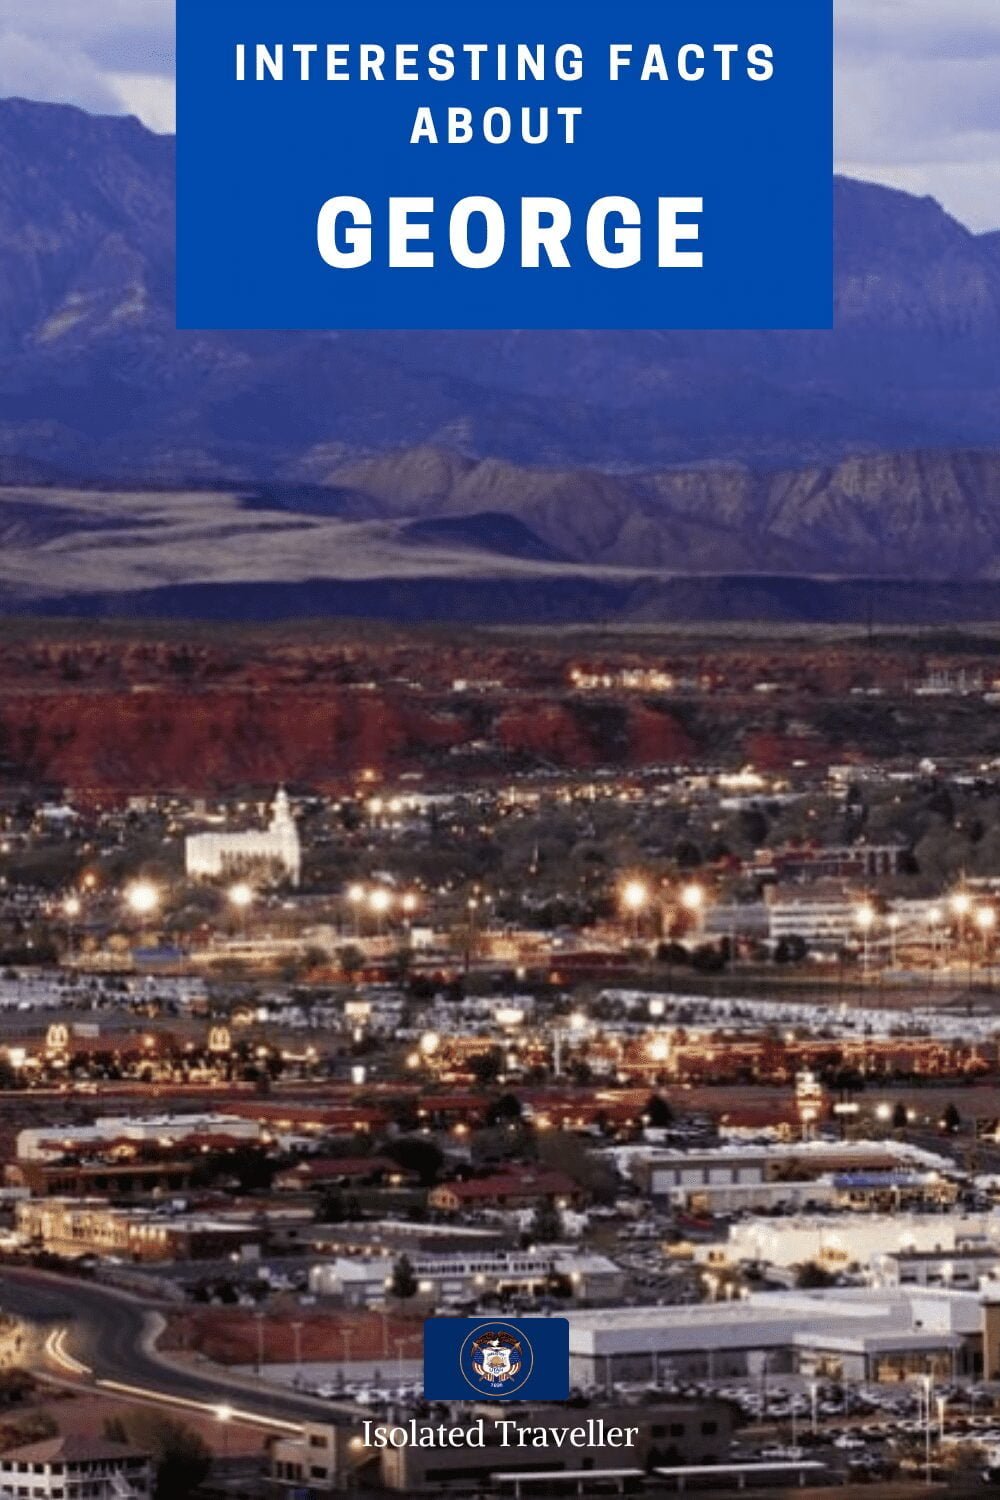 Facts About St. George, Utah